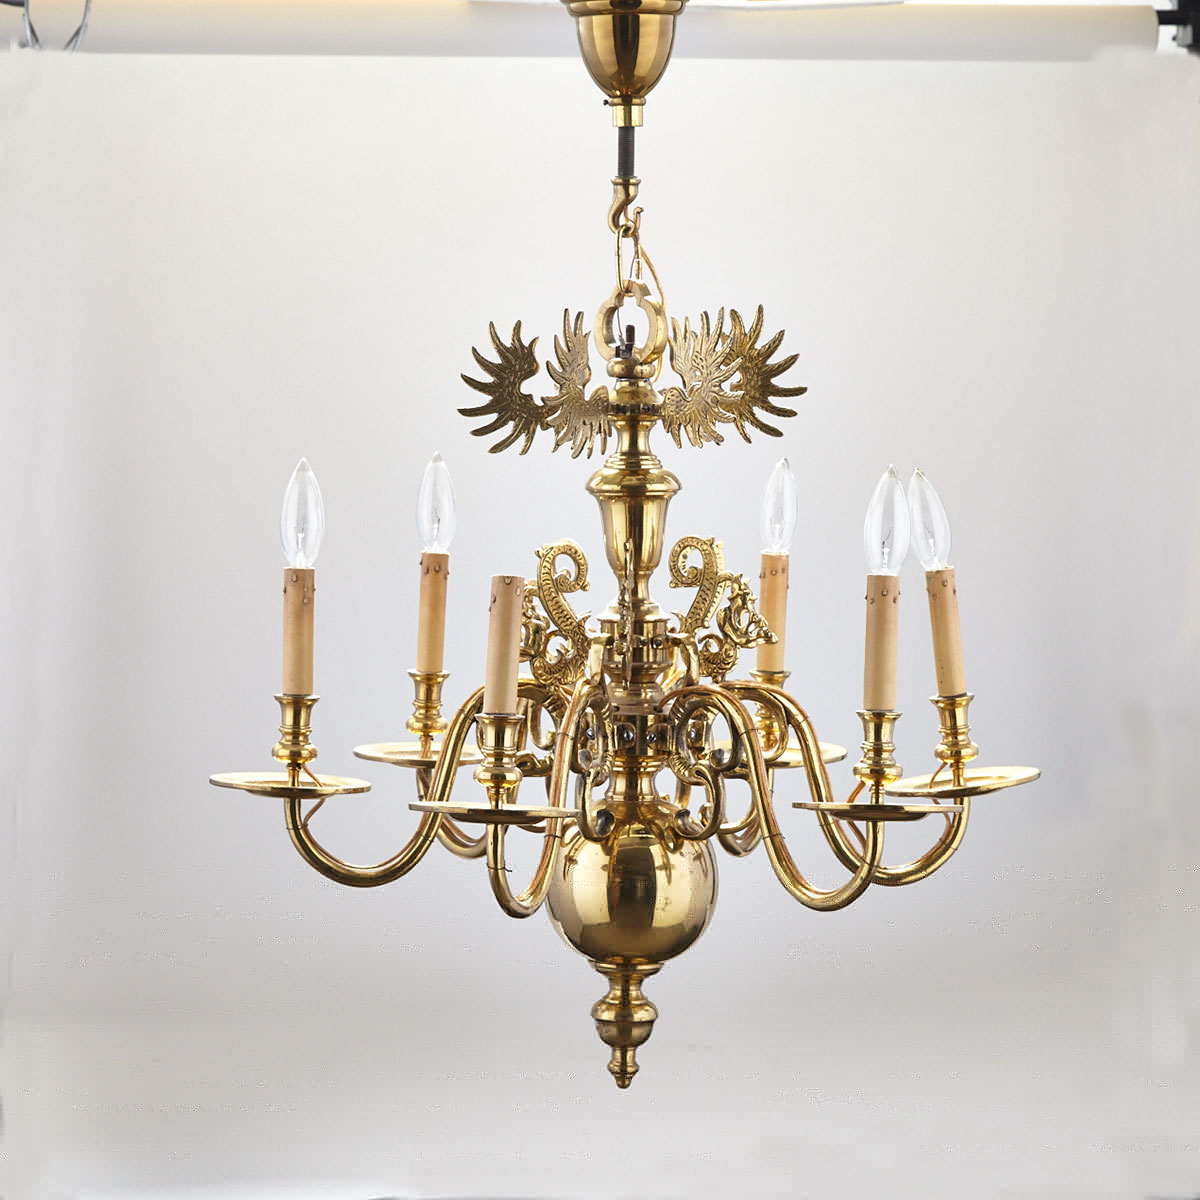 Austro-Hungarian Lacquered Brass Six Light Chandelier, mid 20th century